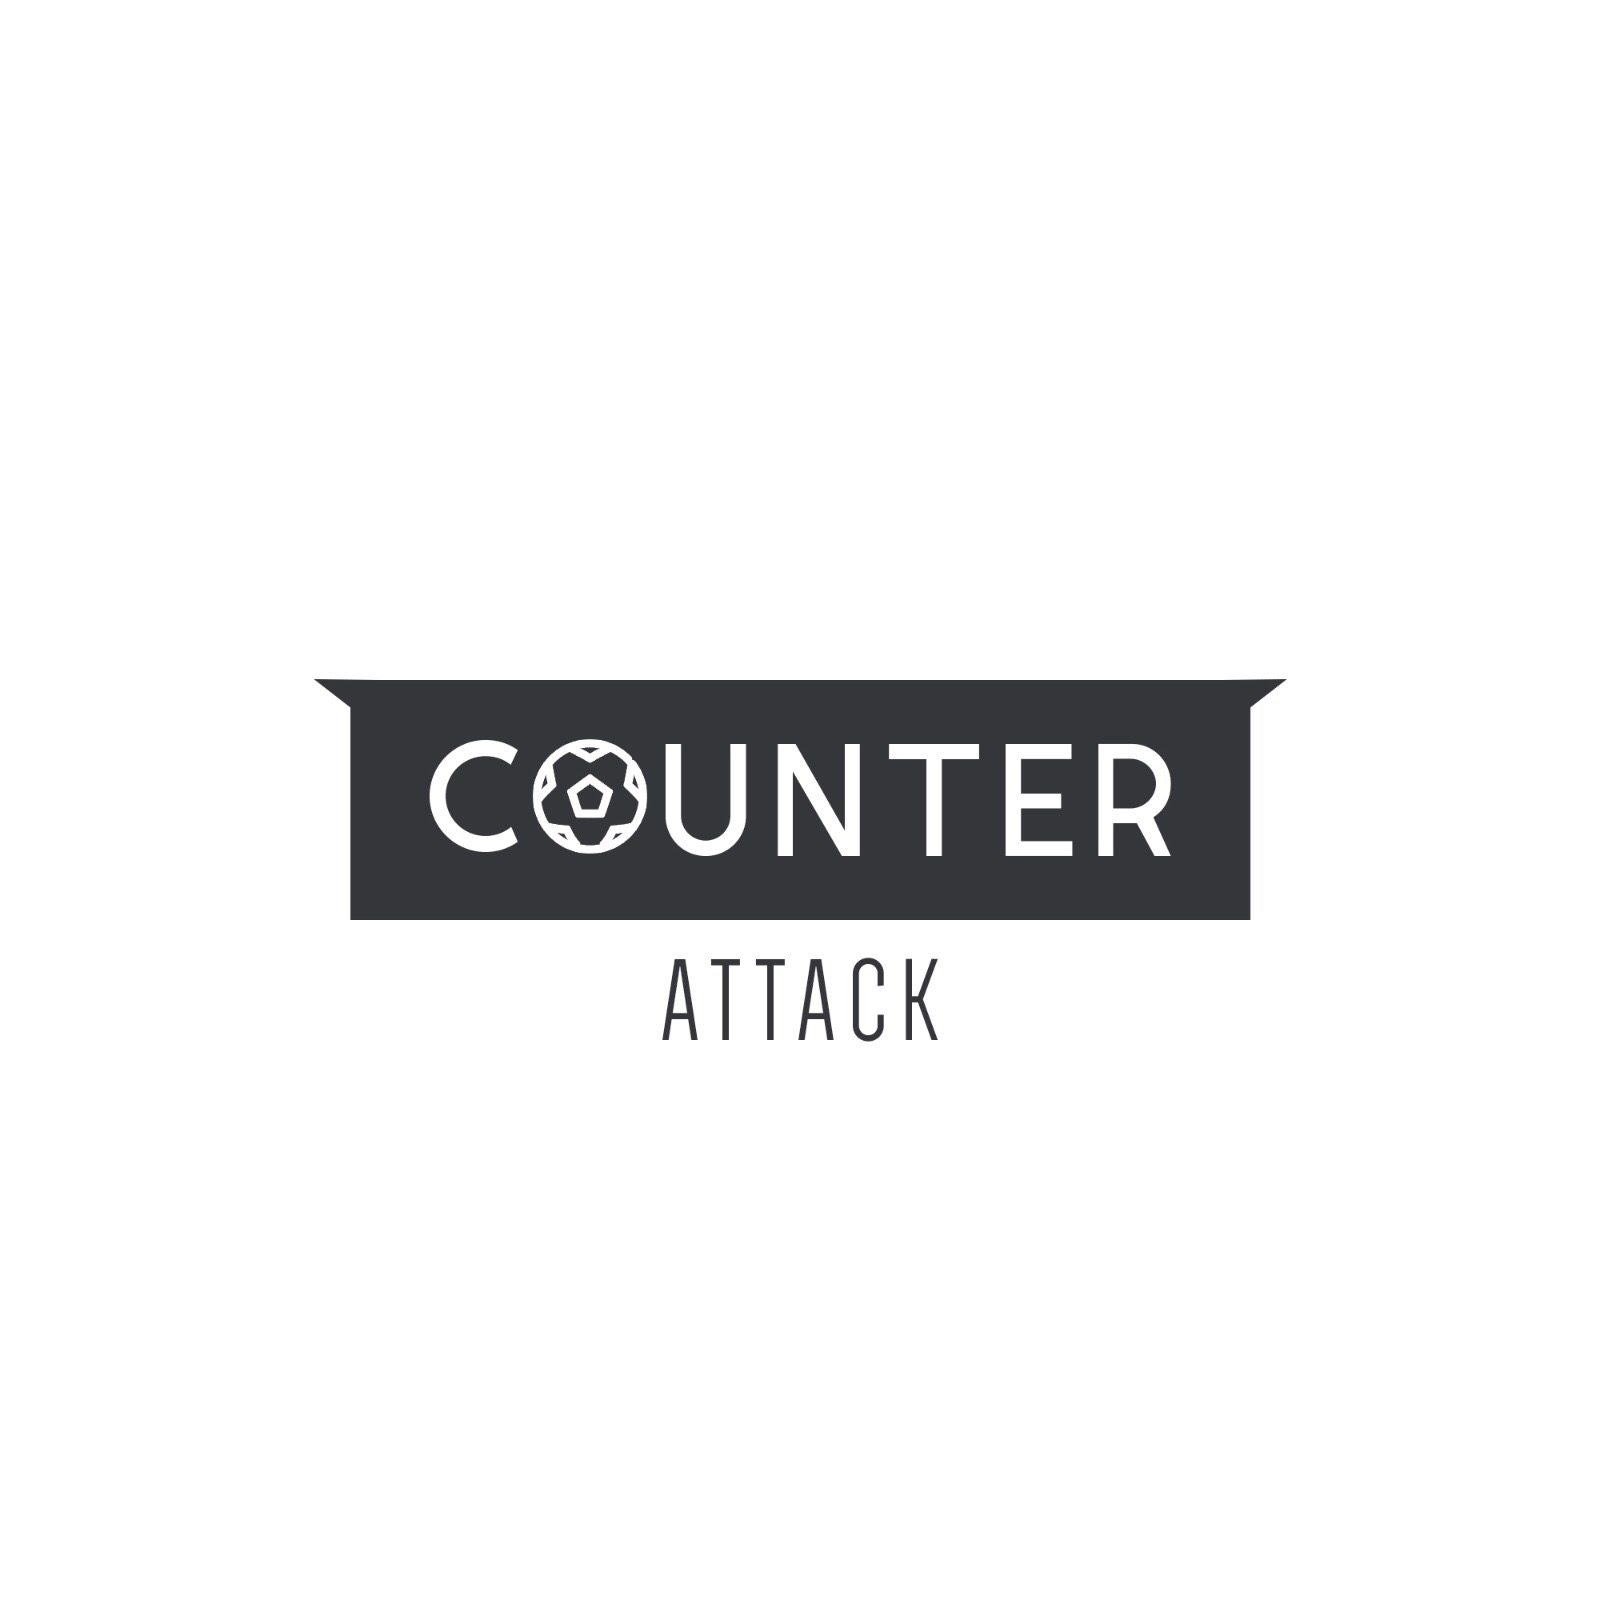 Counter Attack - Episode 51 - Sarri Wrong For Criticism of Players??